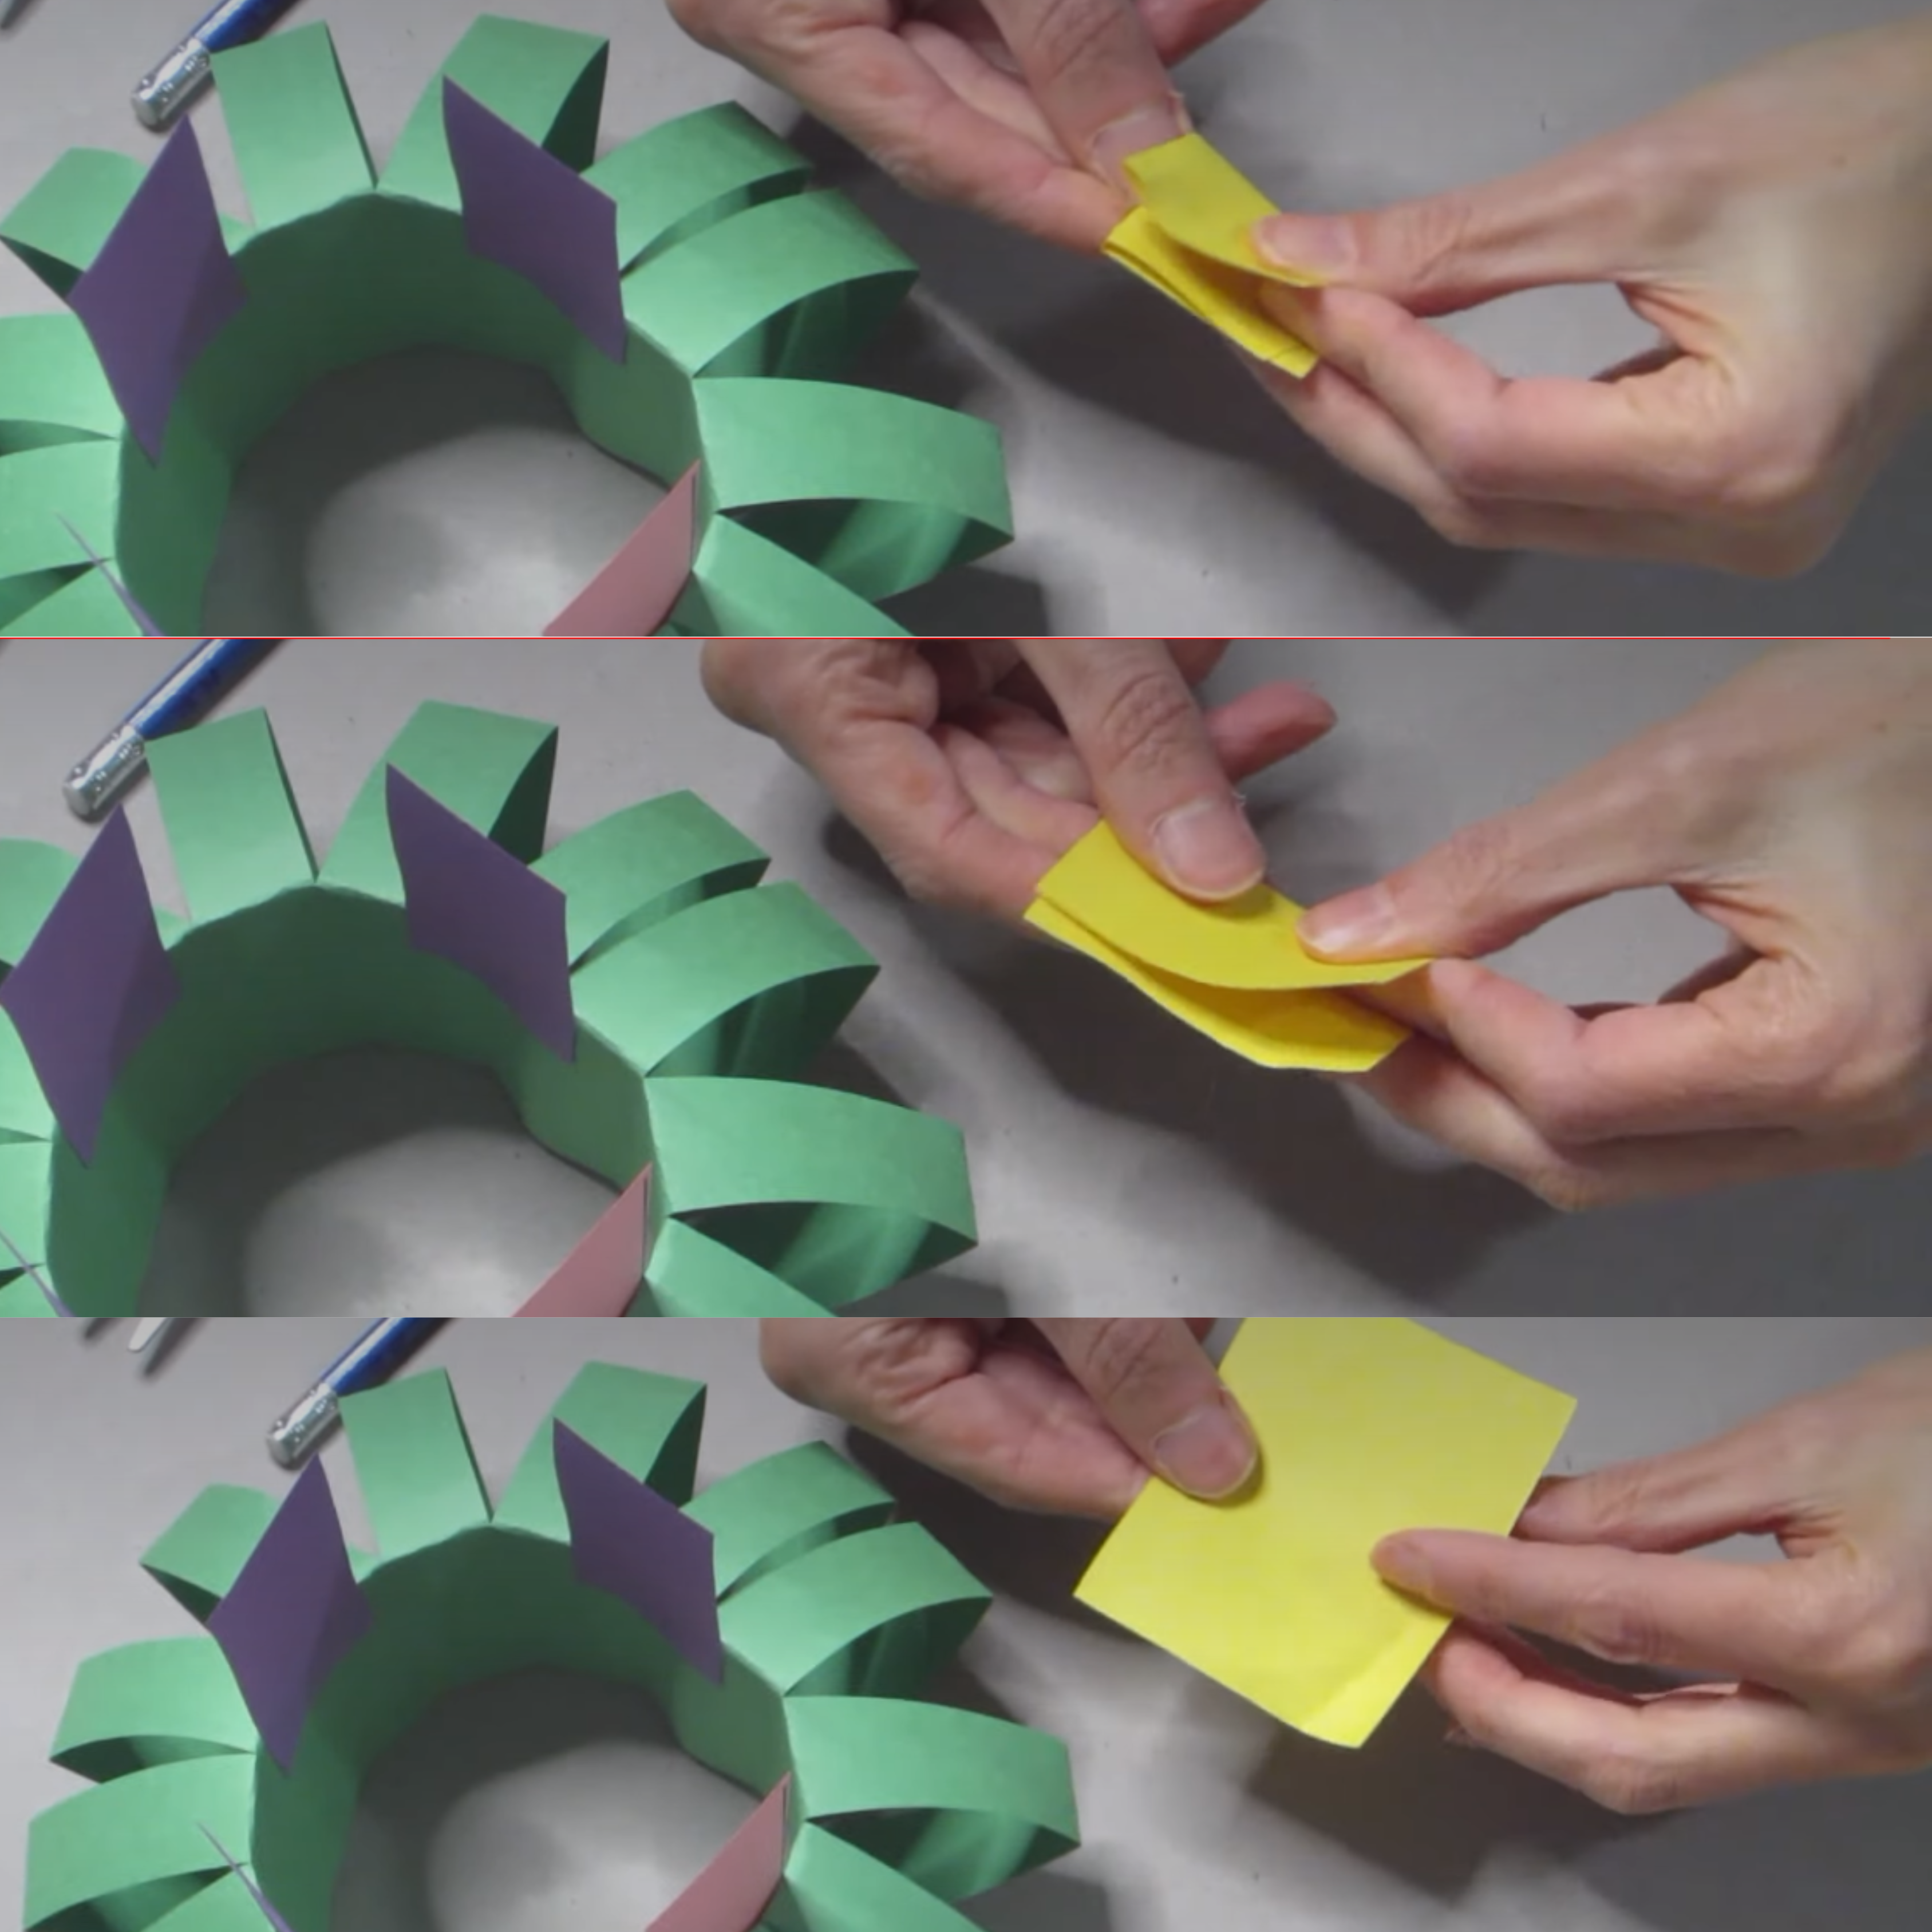 Gluing another colored crafting paper to the wreath